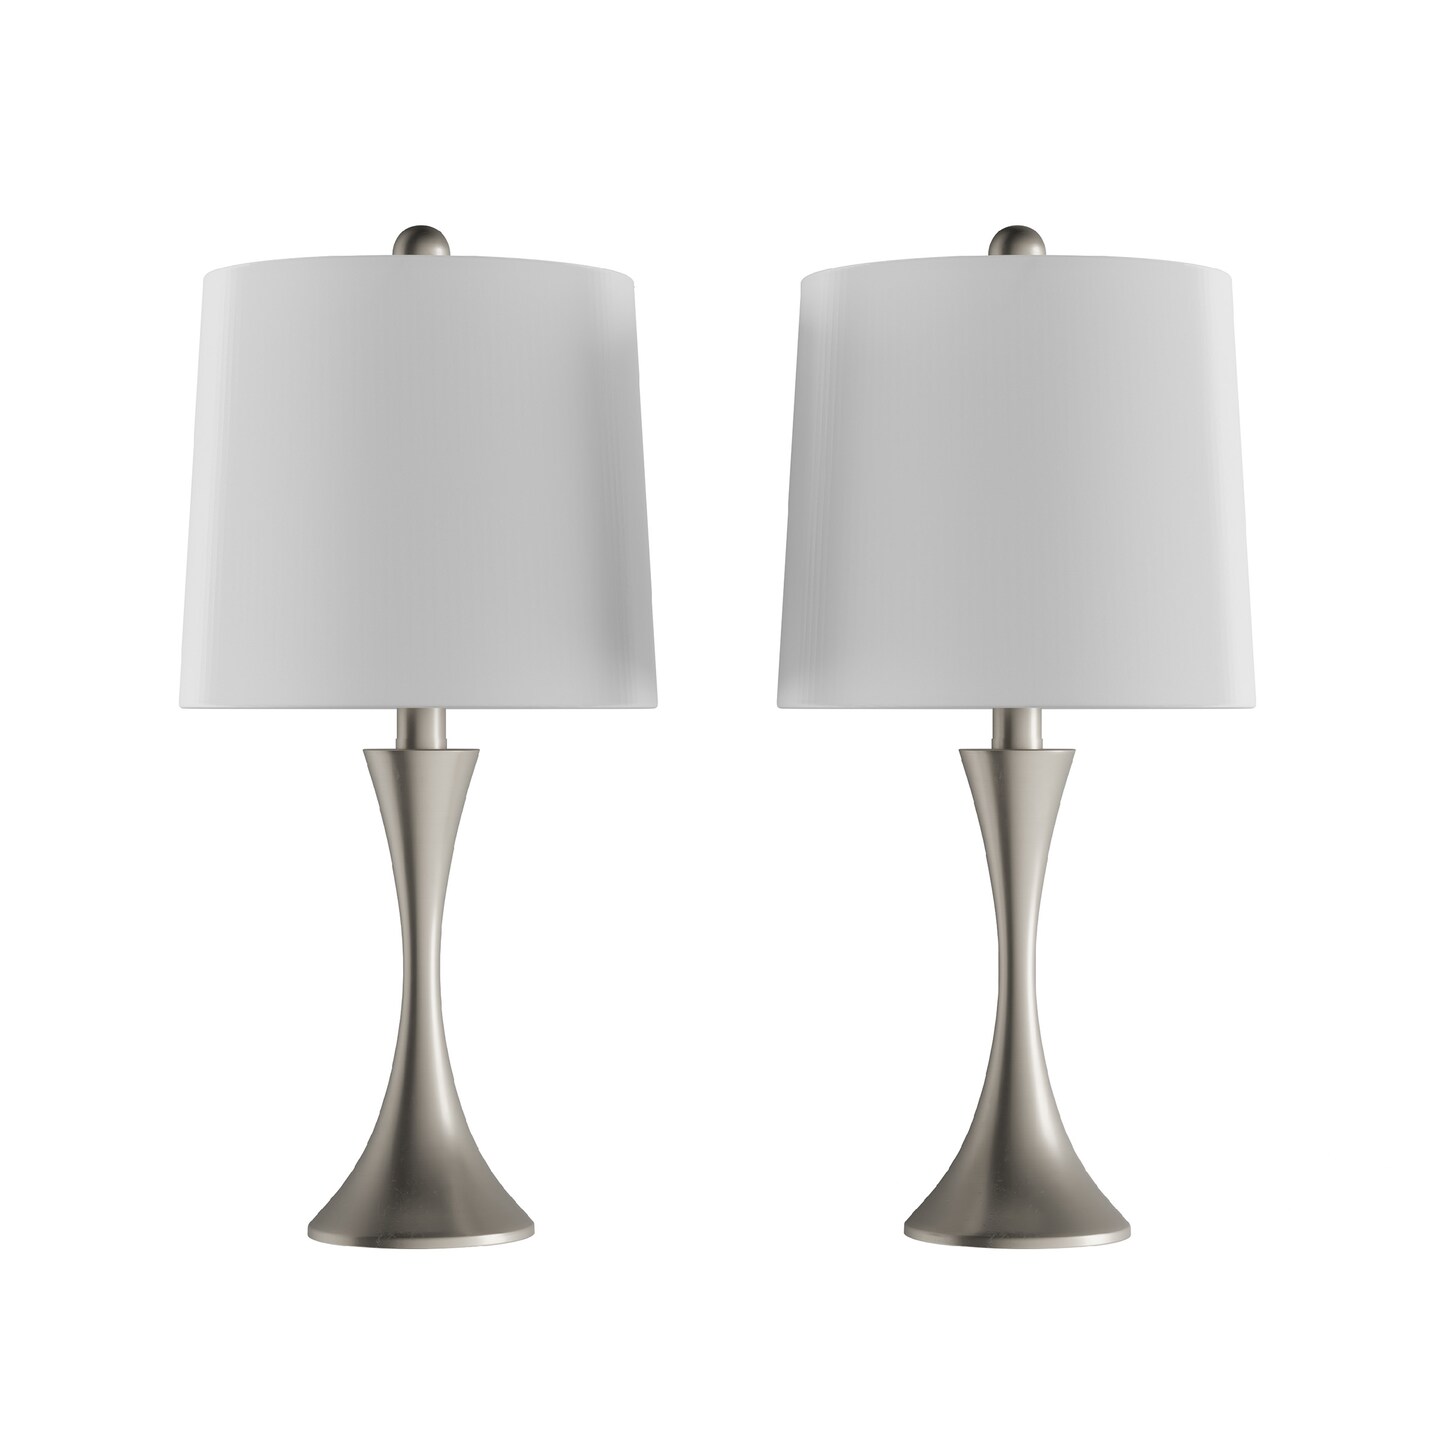 Lavish Home Table Lamps  Set of 2 Mid-Century Modern Metal Flared Trumpet Base with Energy Efficient LED Light Bulbs Included